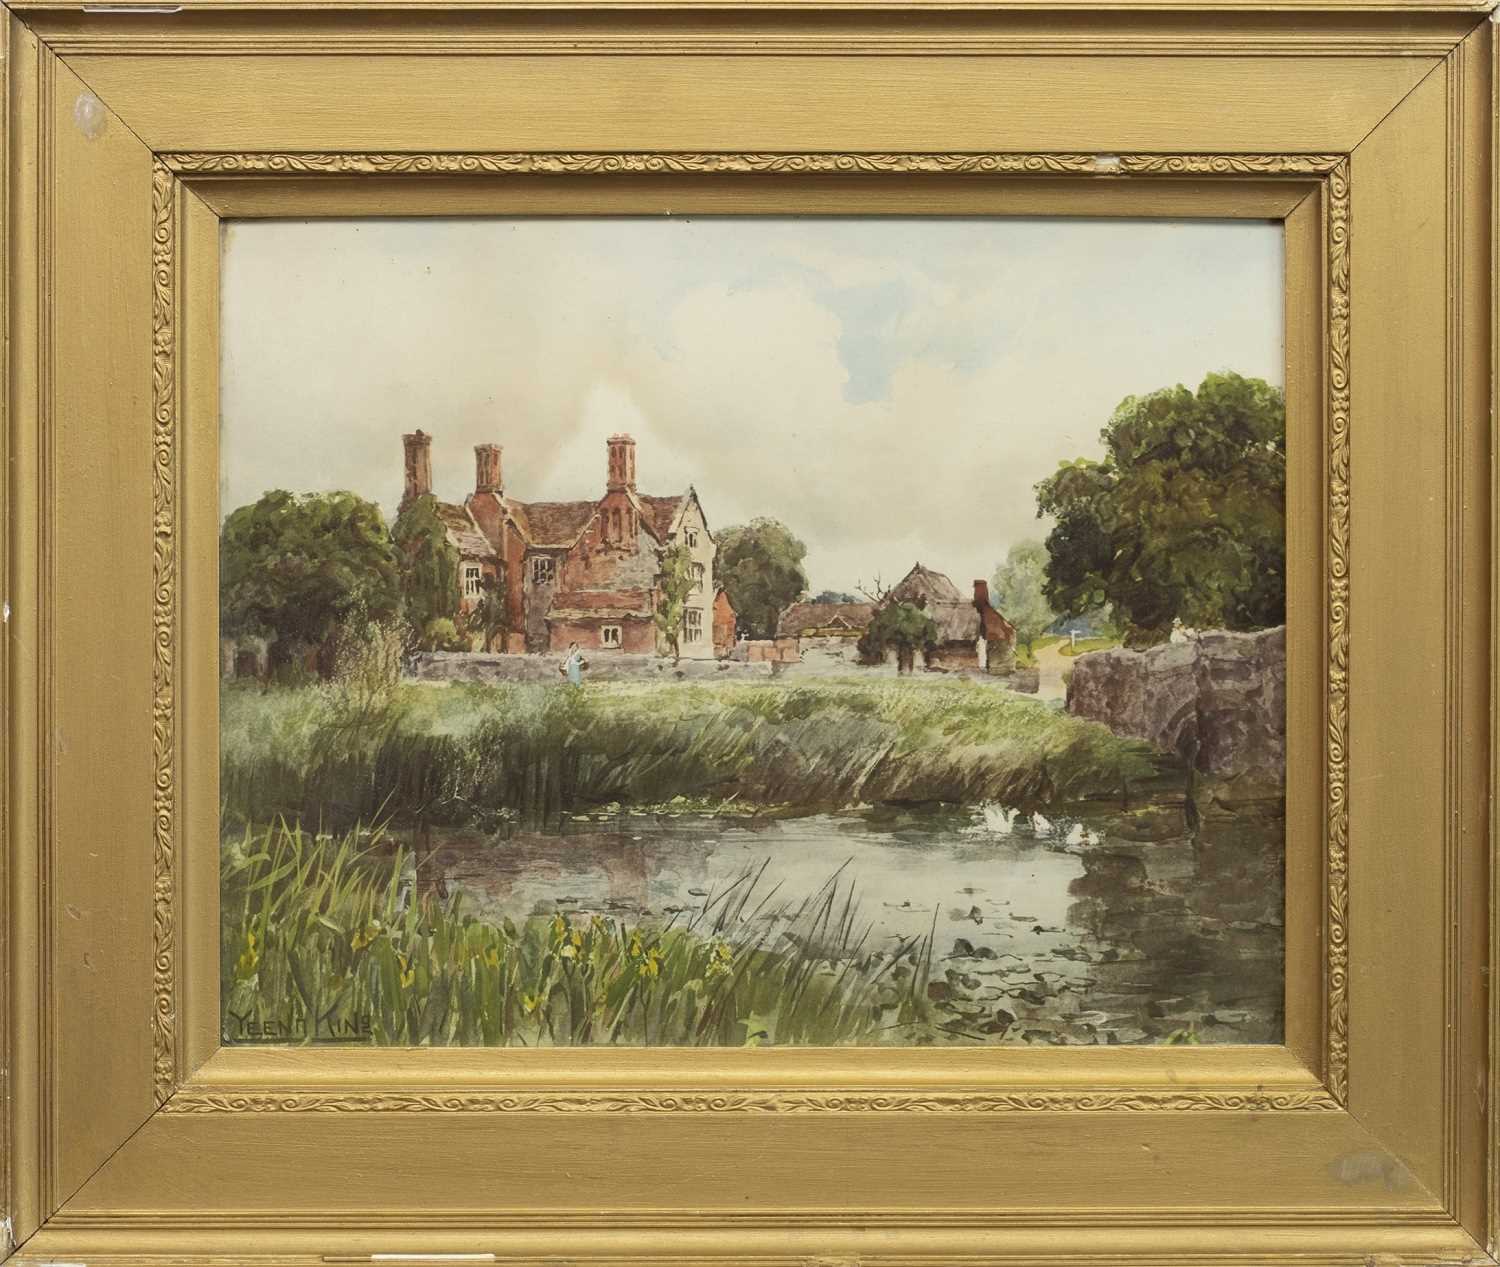 Lot 463 - FIGURE BY A COUNTRY HOUSE, A WATERCOLOUR BY HENRY JOHN YEEND KING